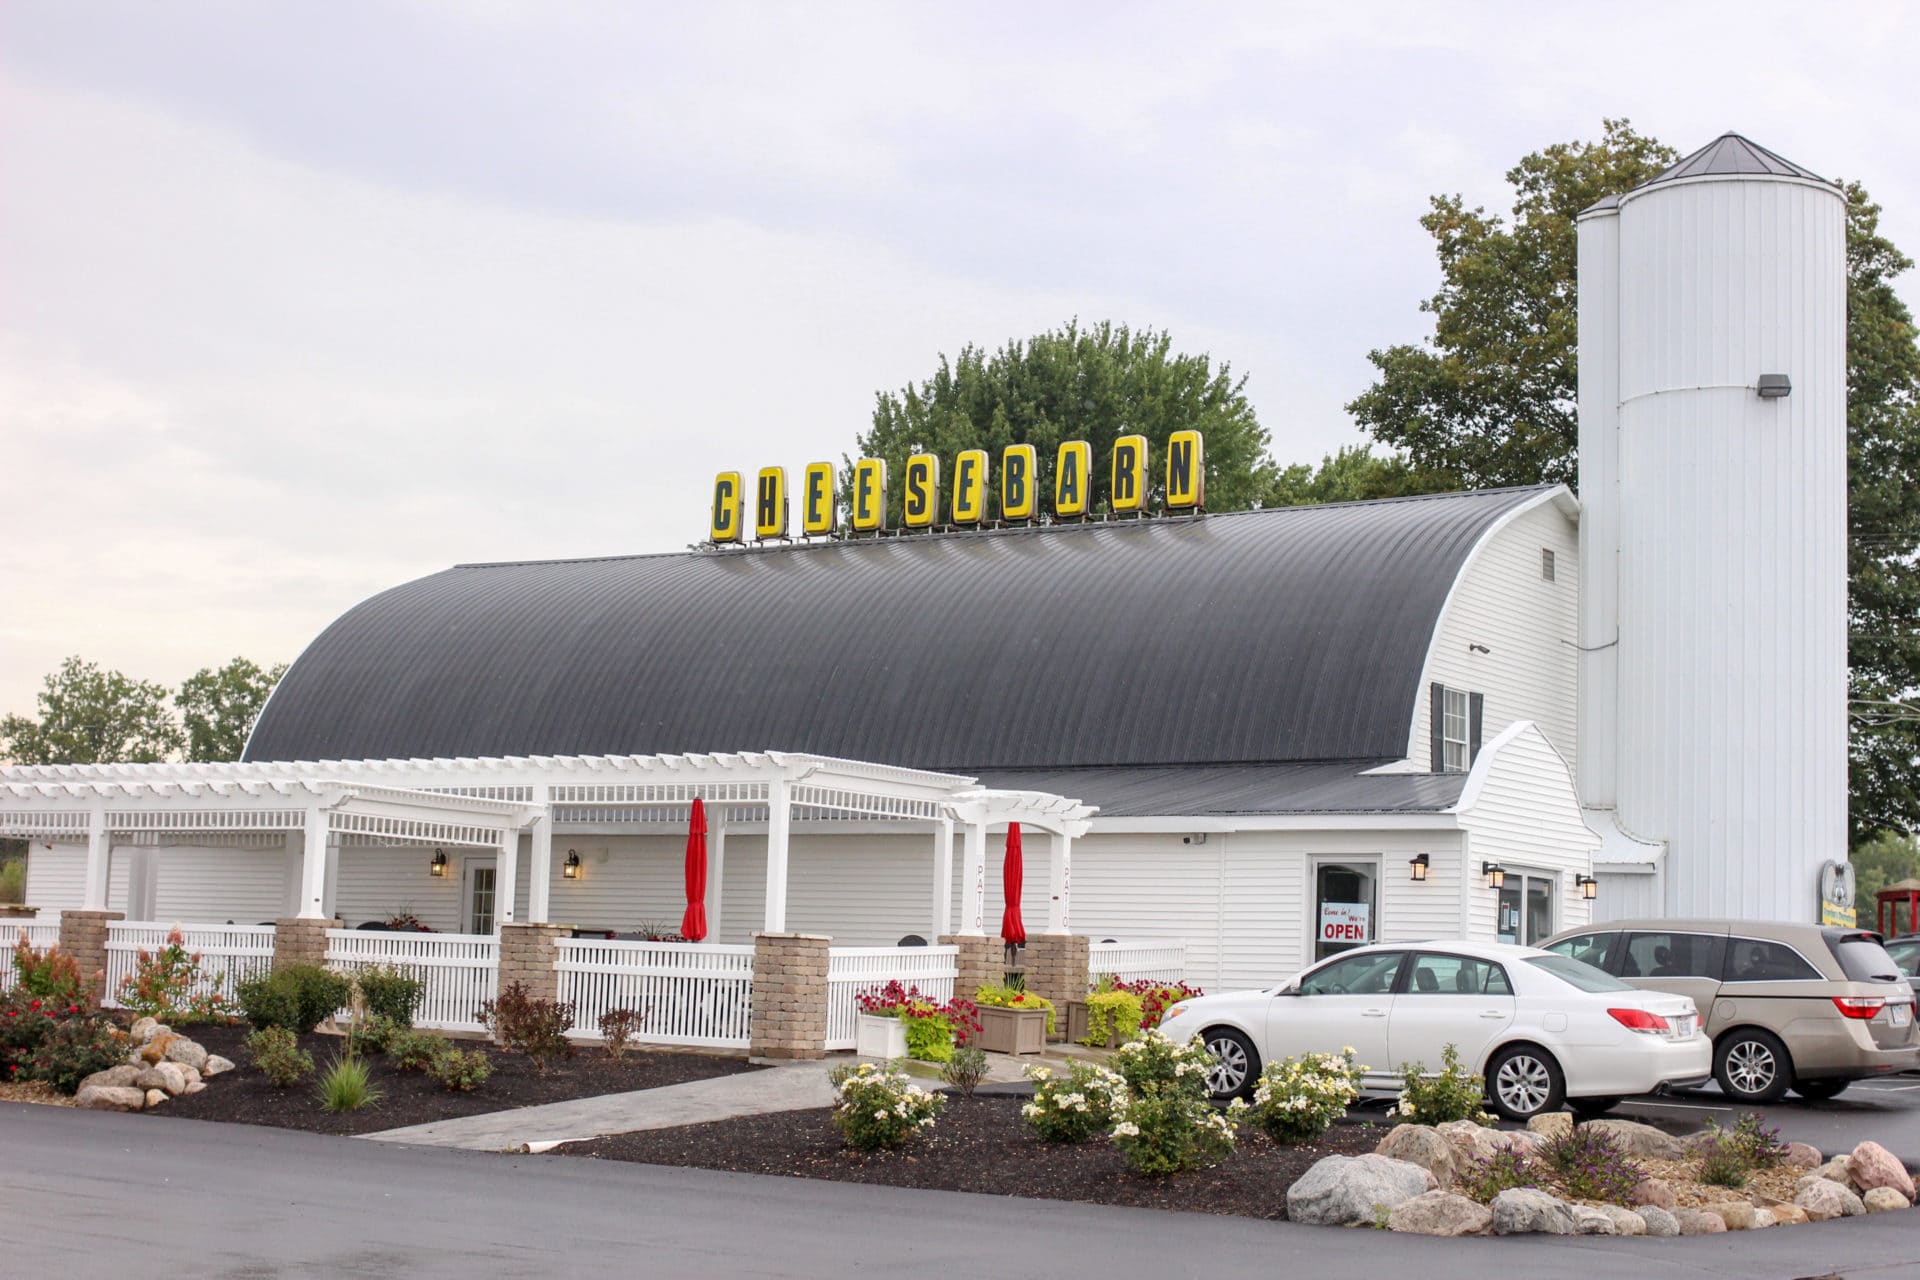 The cheese emporium’s flagship barn is located just off I-71 in Ashland, Ohio.